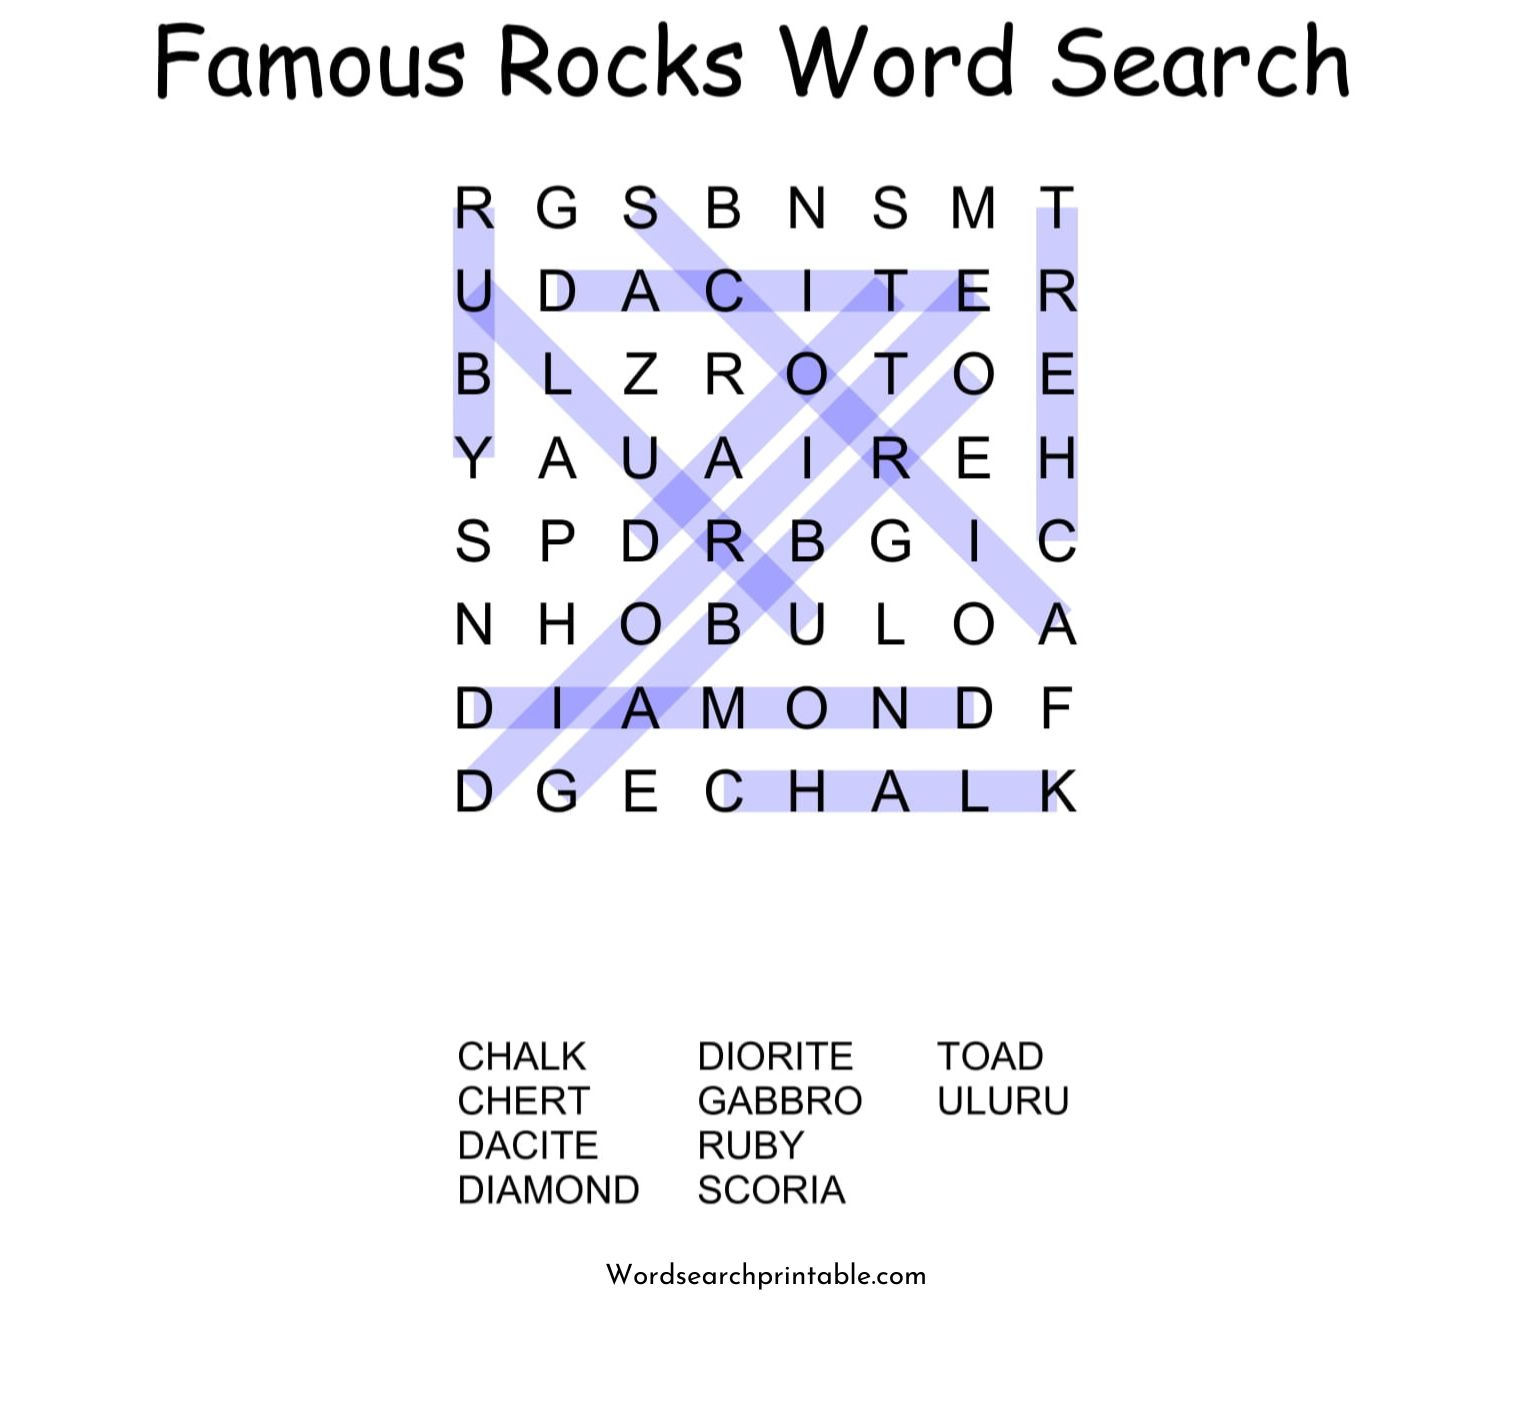 famous rocks word search puzzle solution